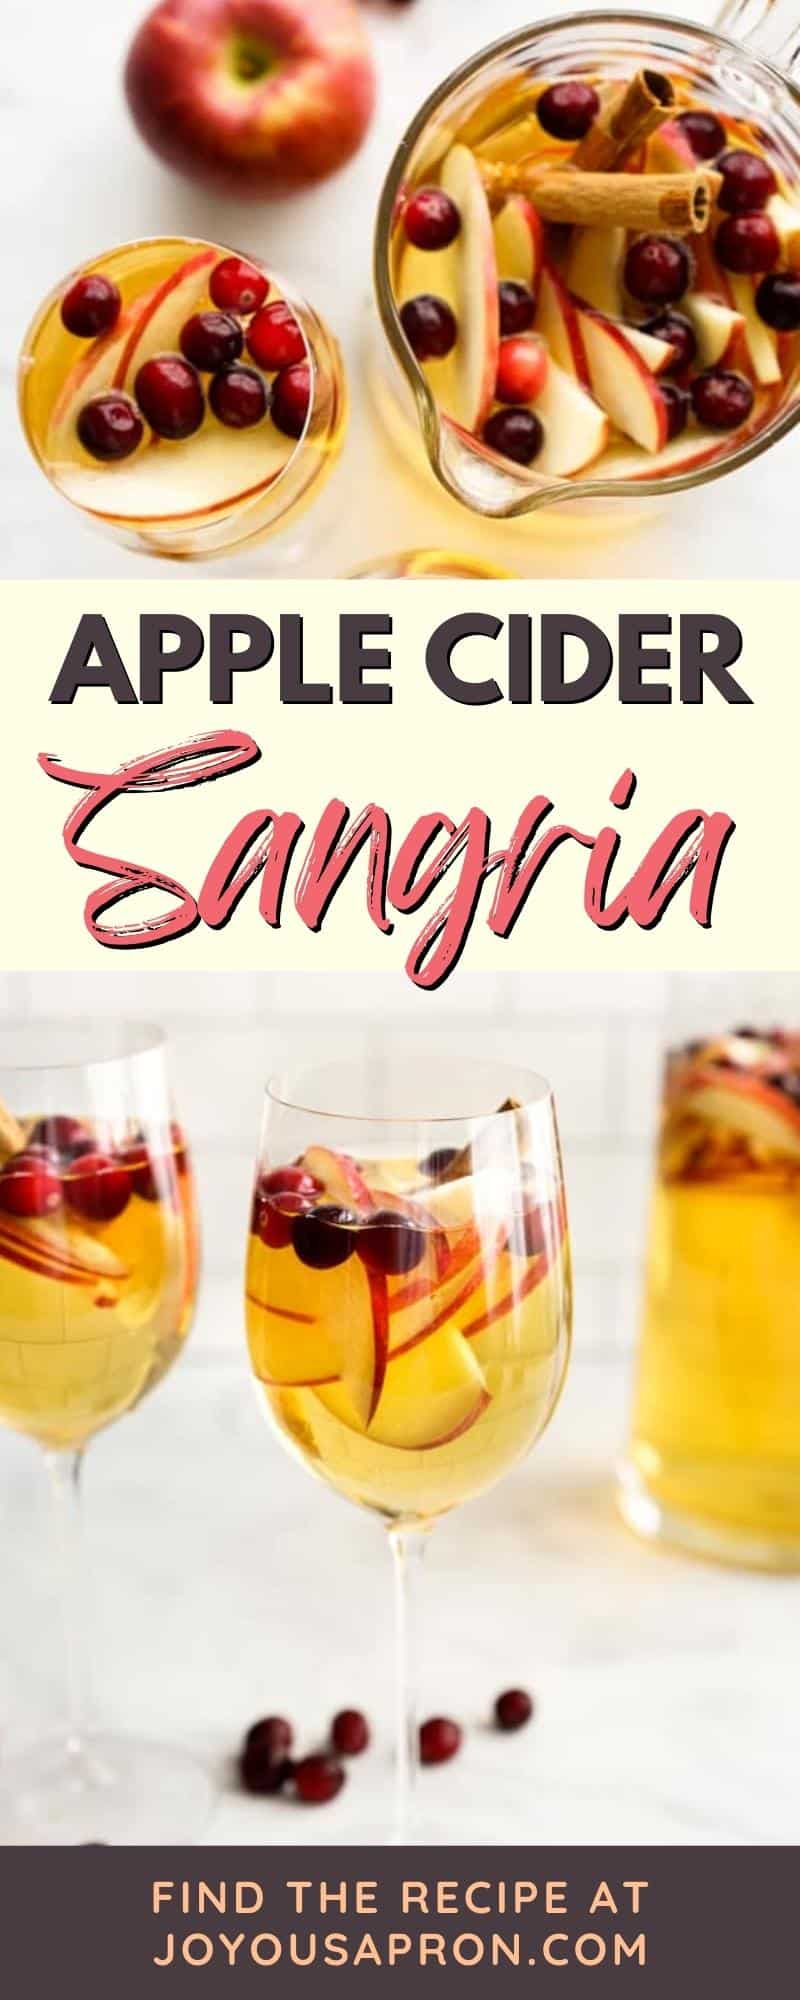 Apple Cider Sangria - A Fall and holiday inspired alcoholic beverage and drink! This cocktail combines apple cider, white wine, a splash of brandy, club soda, apples, cranberries and cinnamon. via @joyousapron